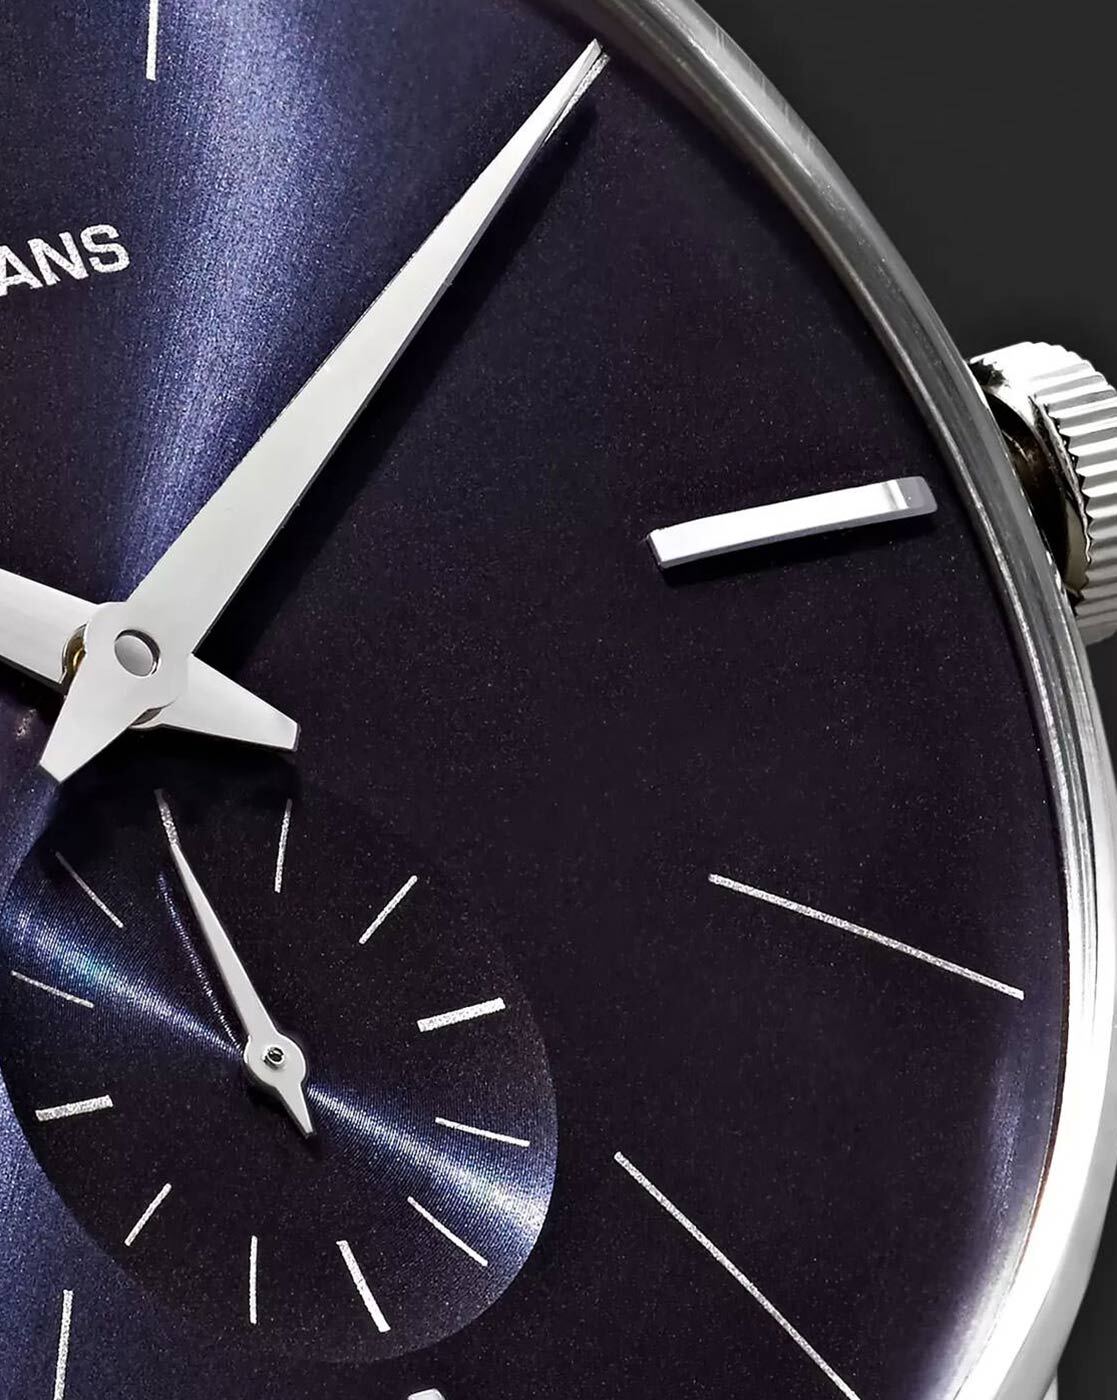 Junghans - Meister Worldtimer | Time and Watches | The watch blog